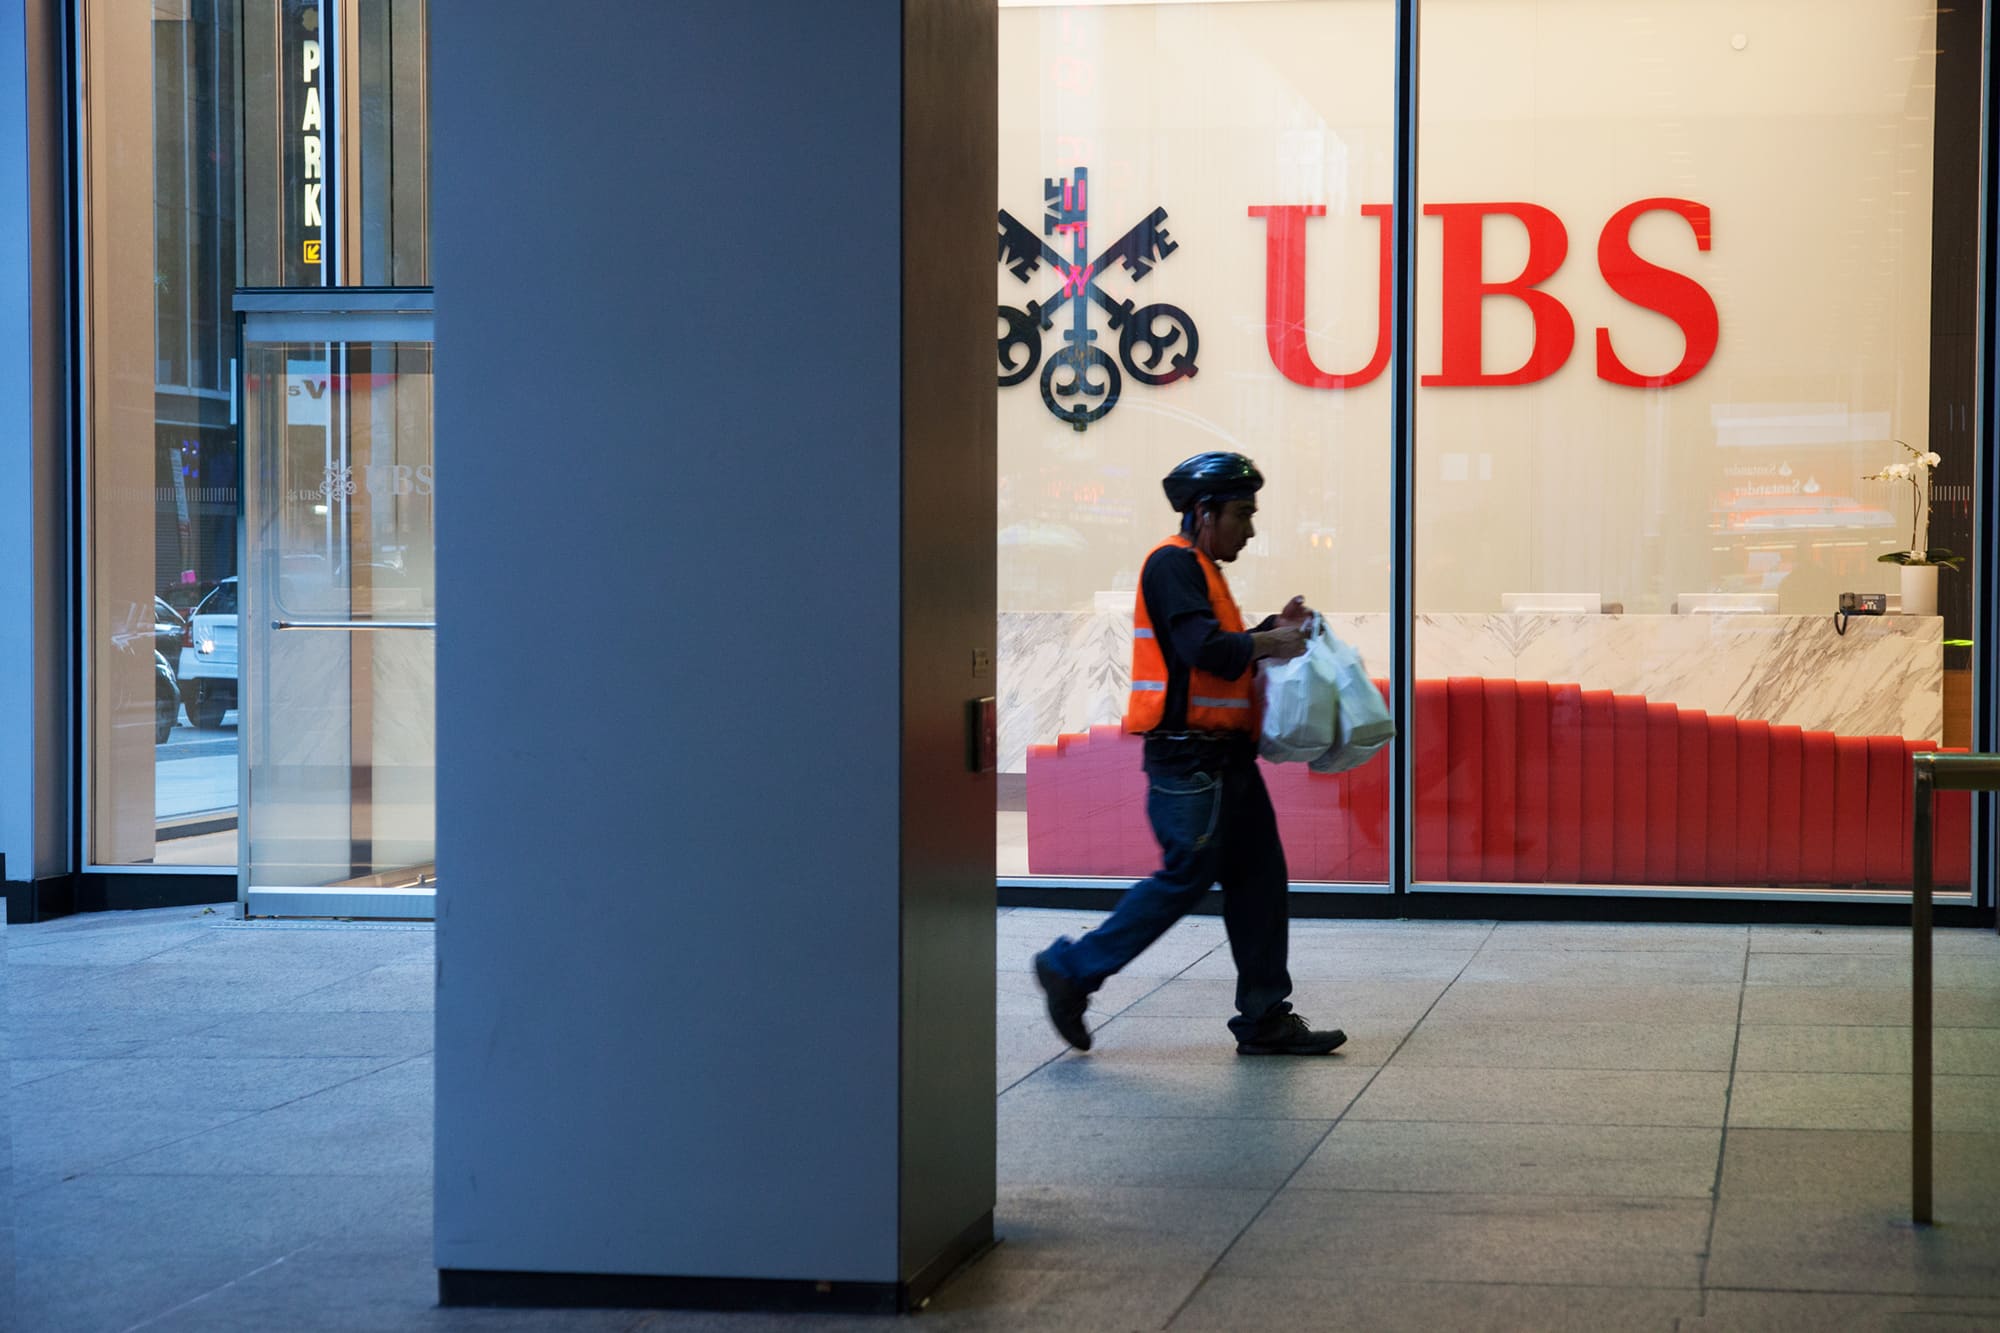 UBS records fall in quarterly profits to $ 1.35 billion, setting ambitious new targets